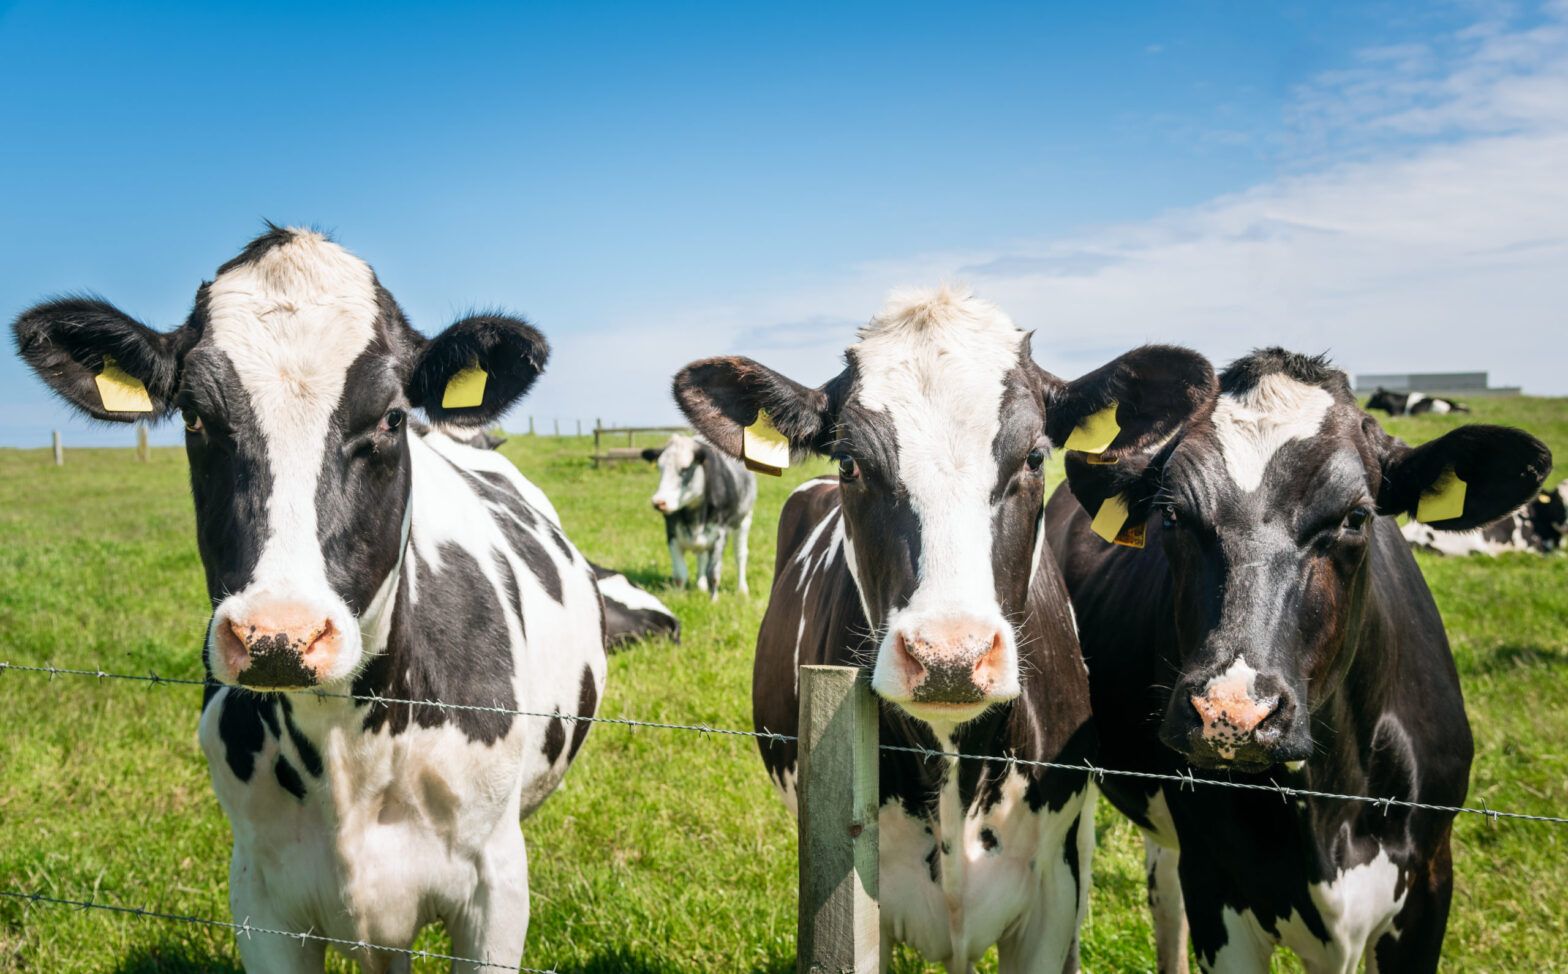 Asset managers target animal agriculture firms in engagement campaign